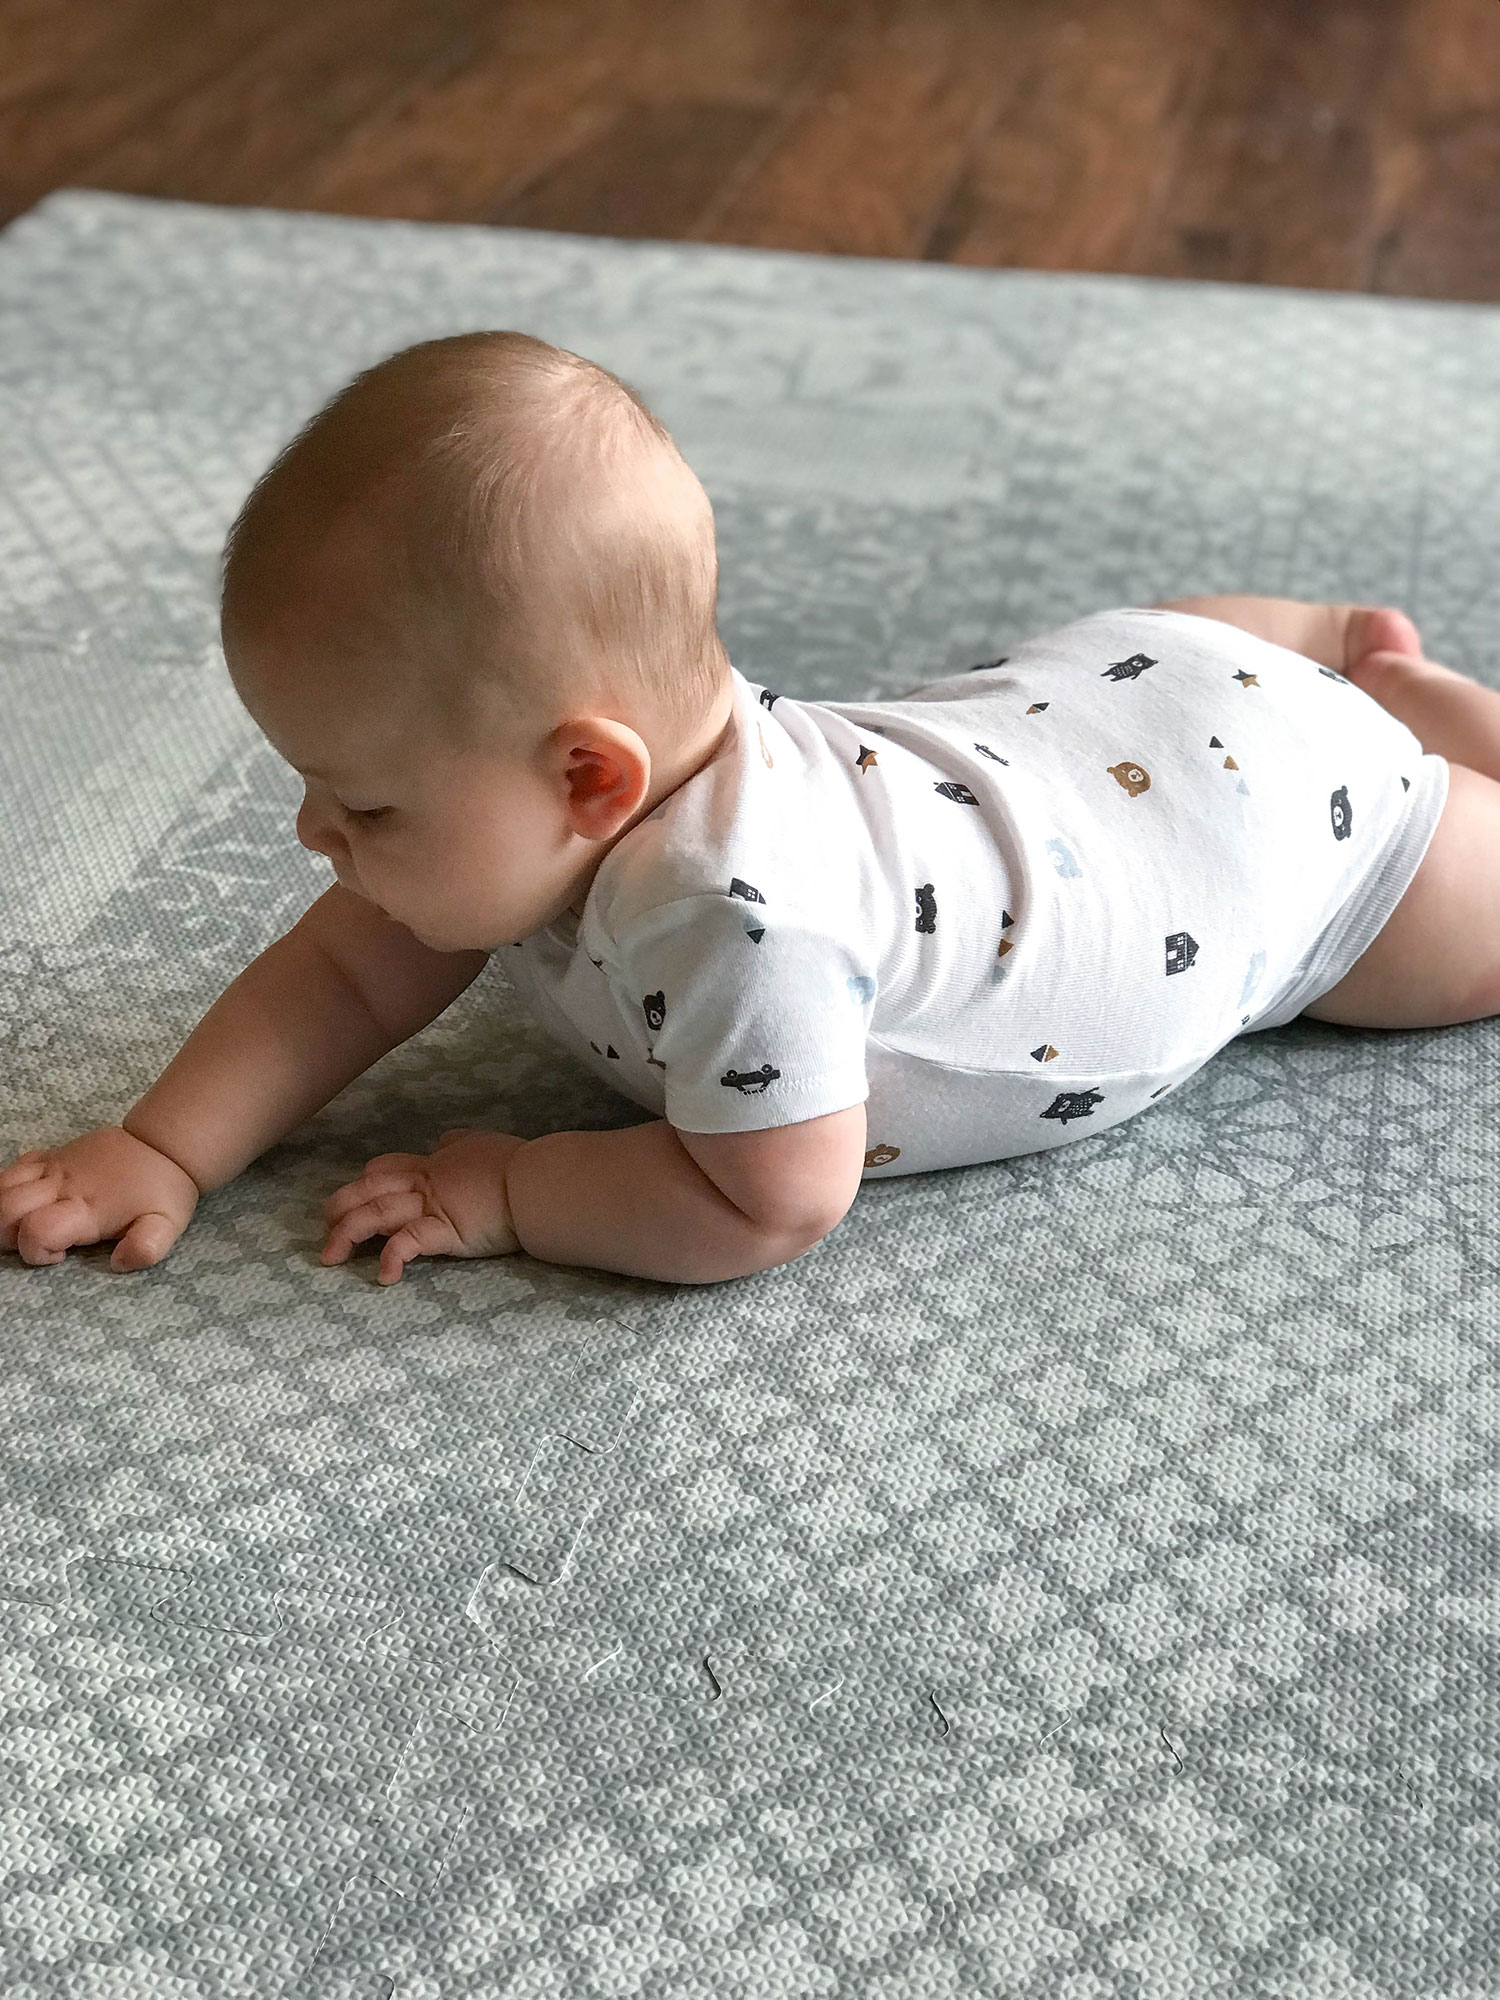 Baby doing tummy time